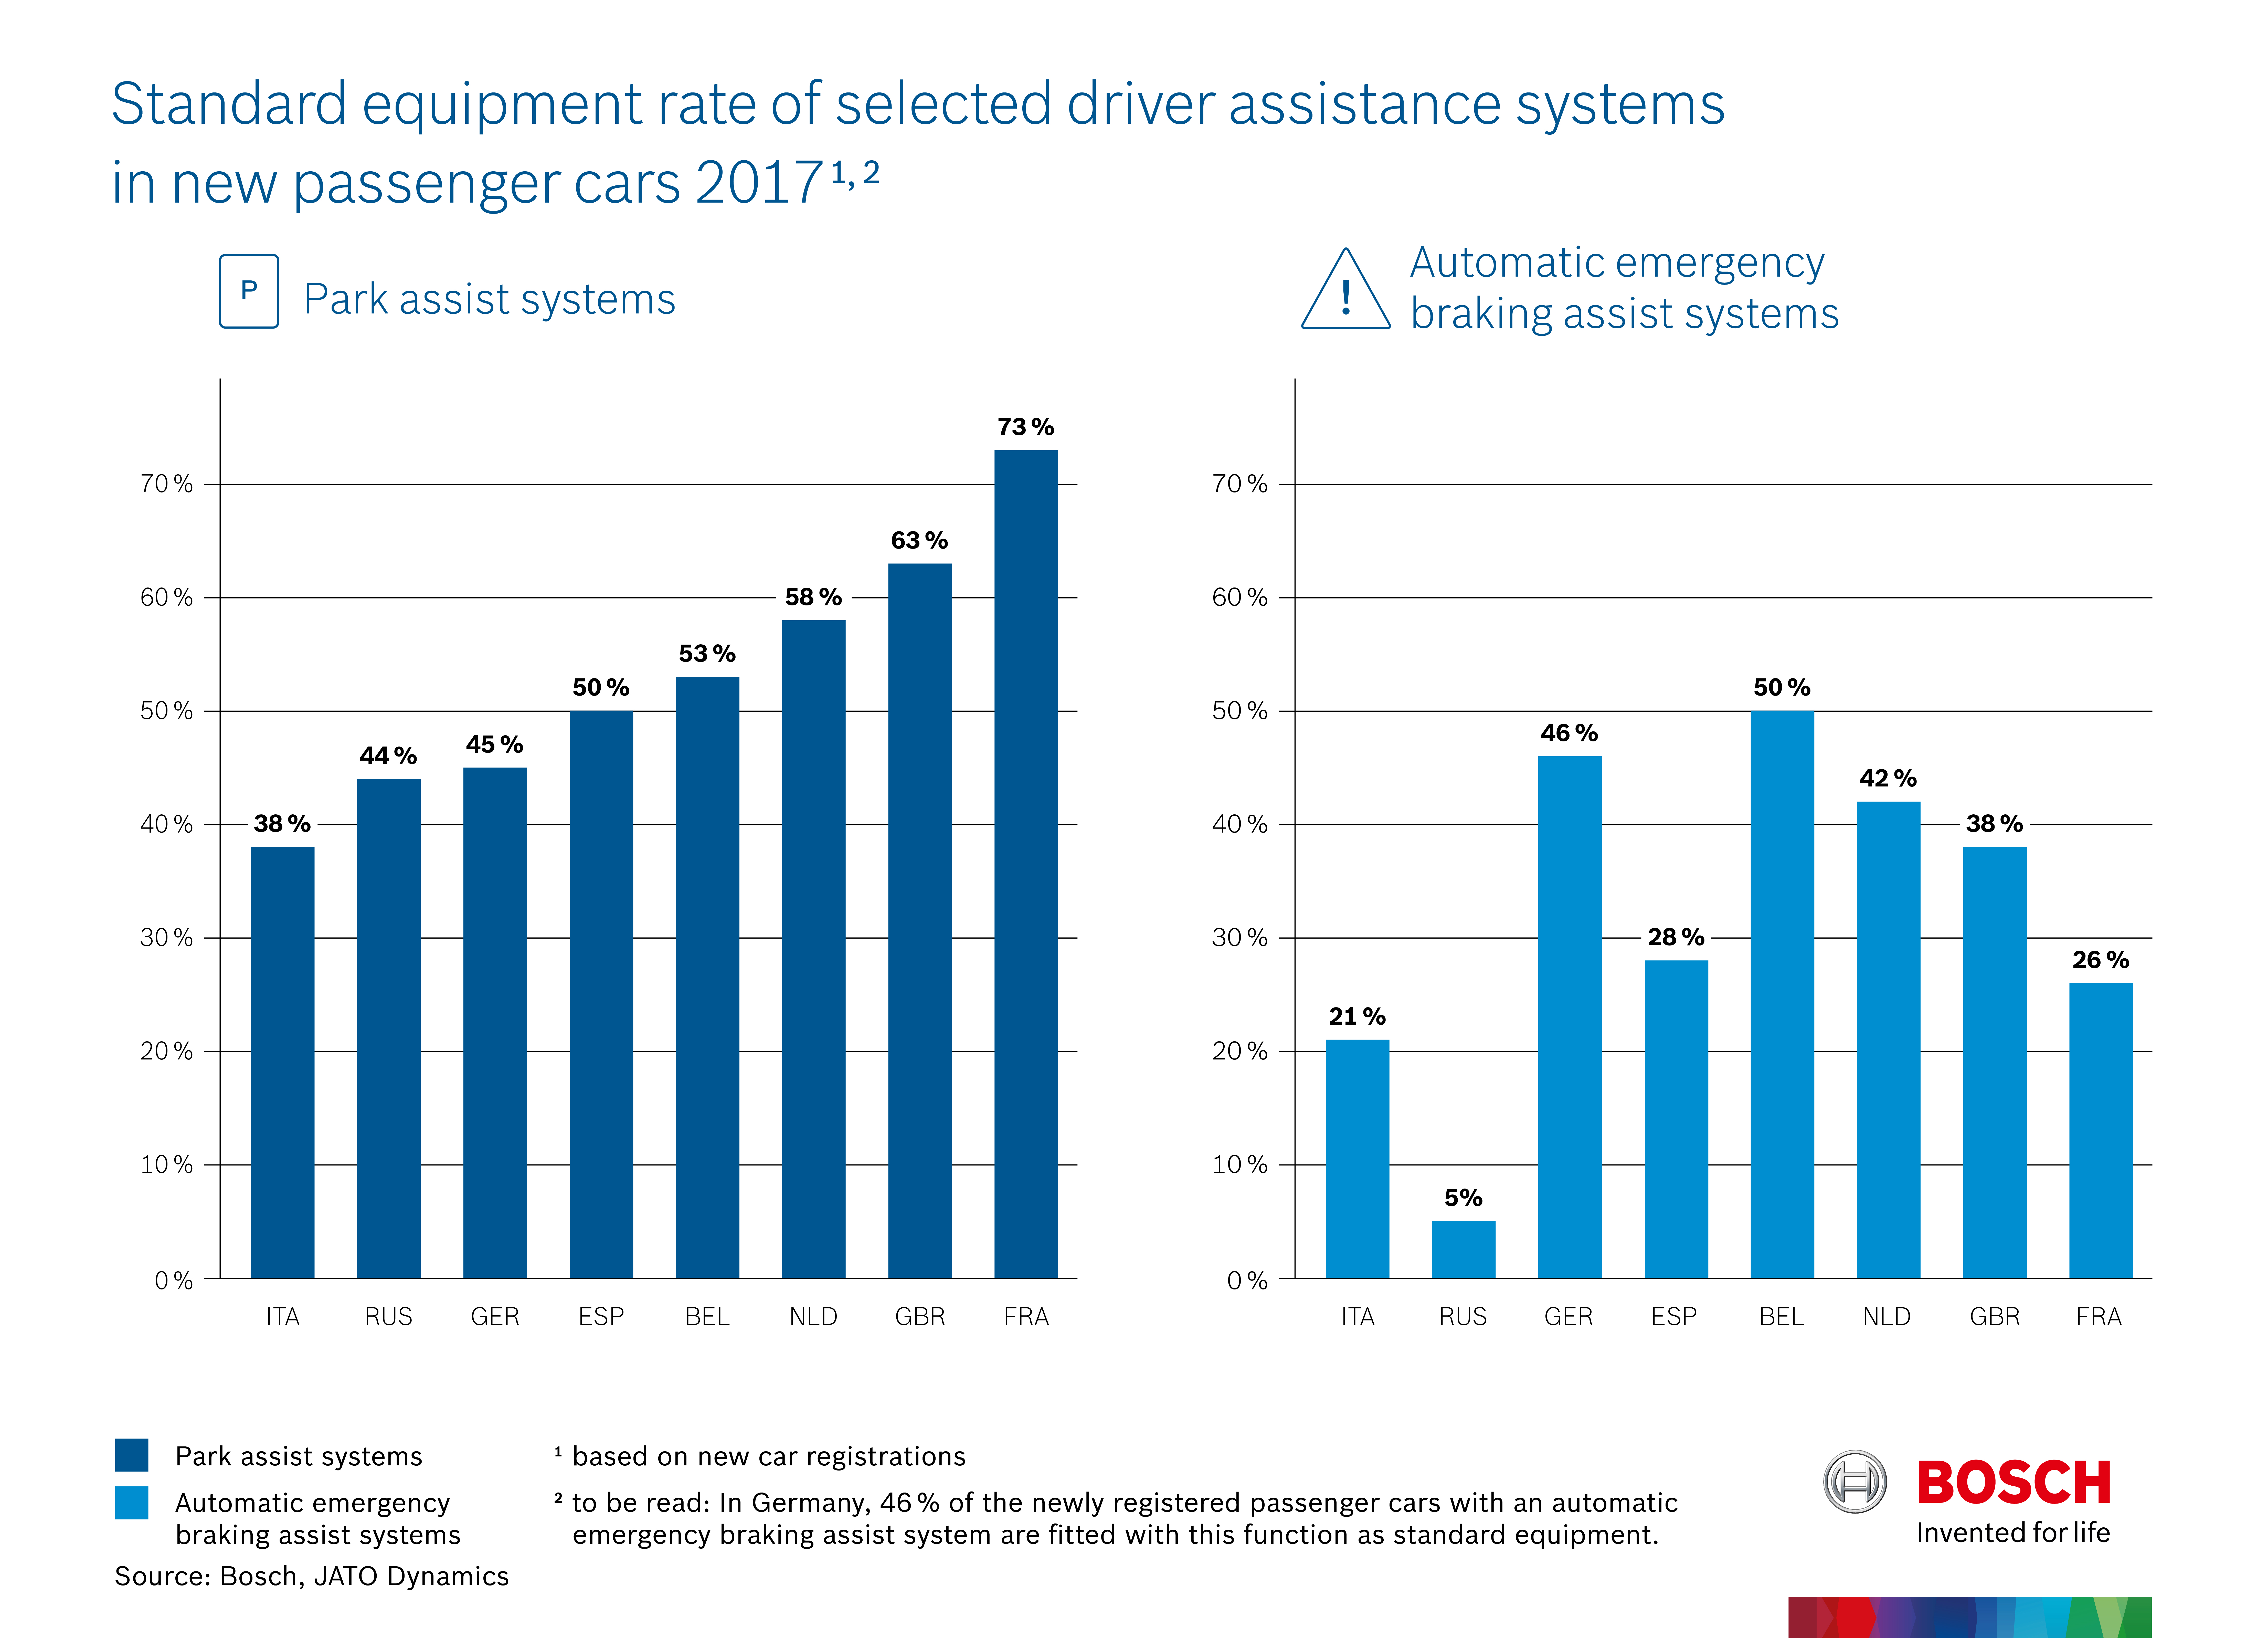 Standard equipment rate of selected driver assistance systems in new passenger cars 2017